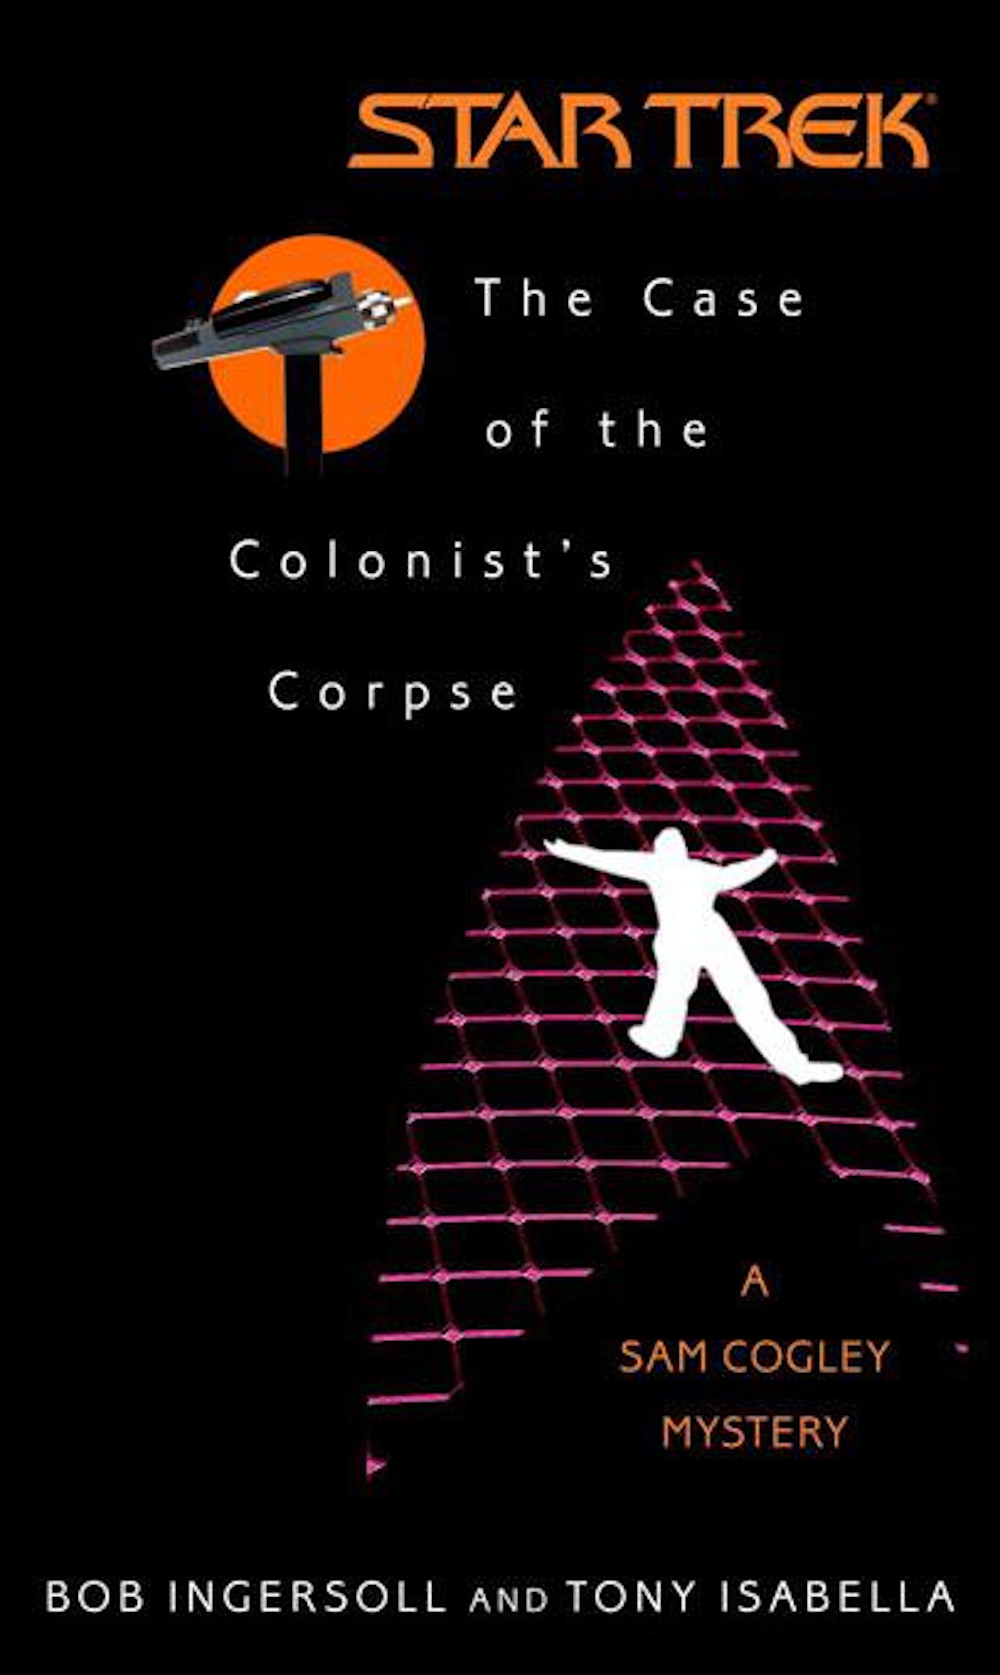 The Case of the Colonist's Corpse: A Sam Cogley Mystery (Dec 2003)